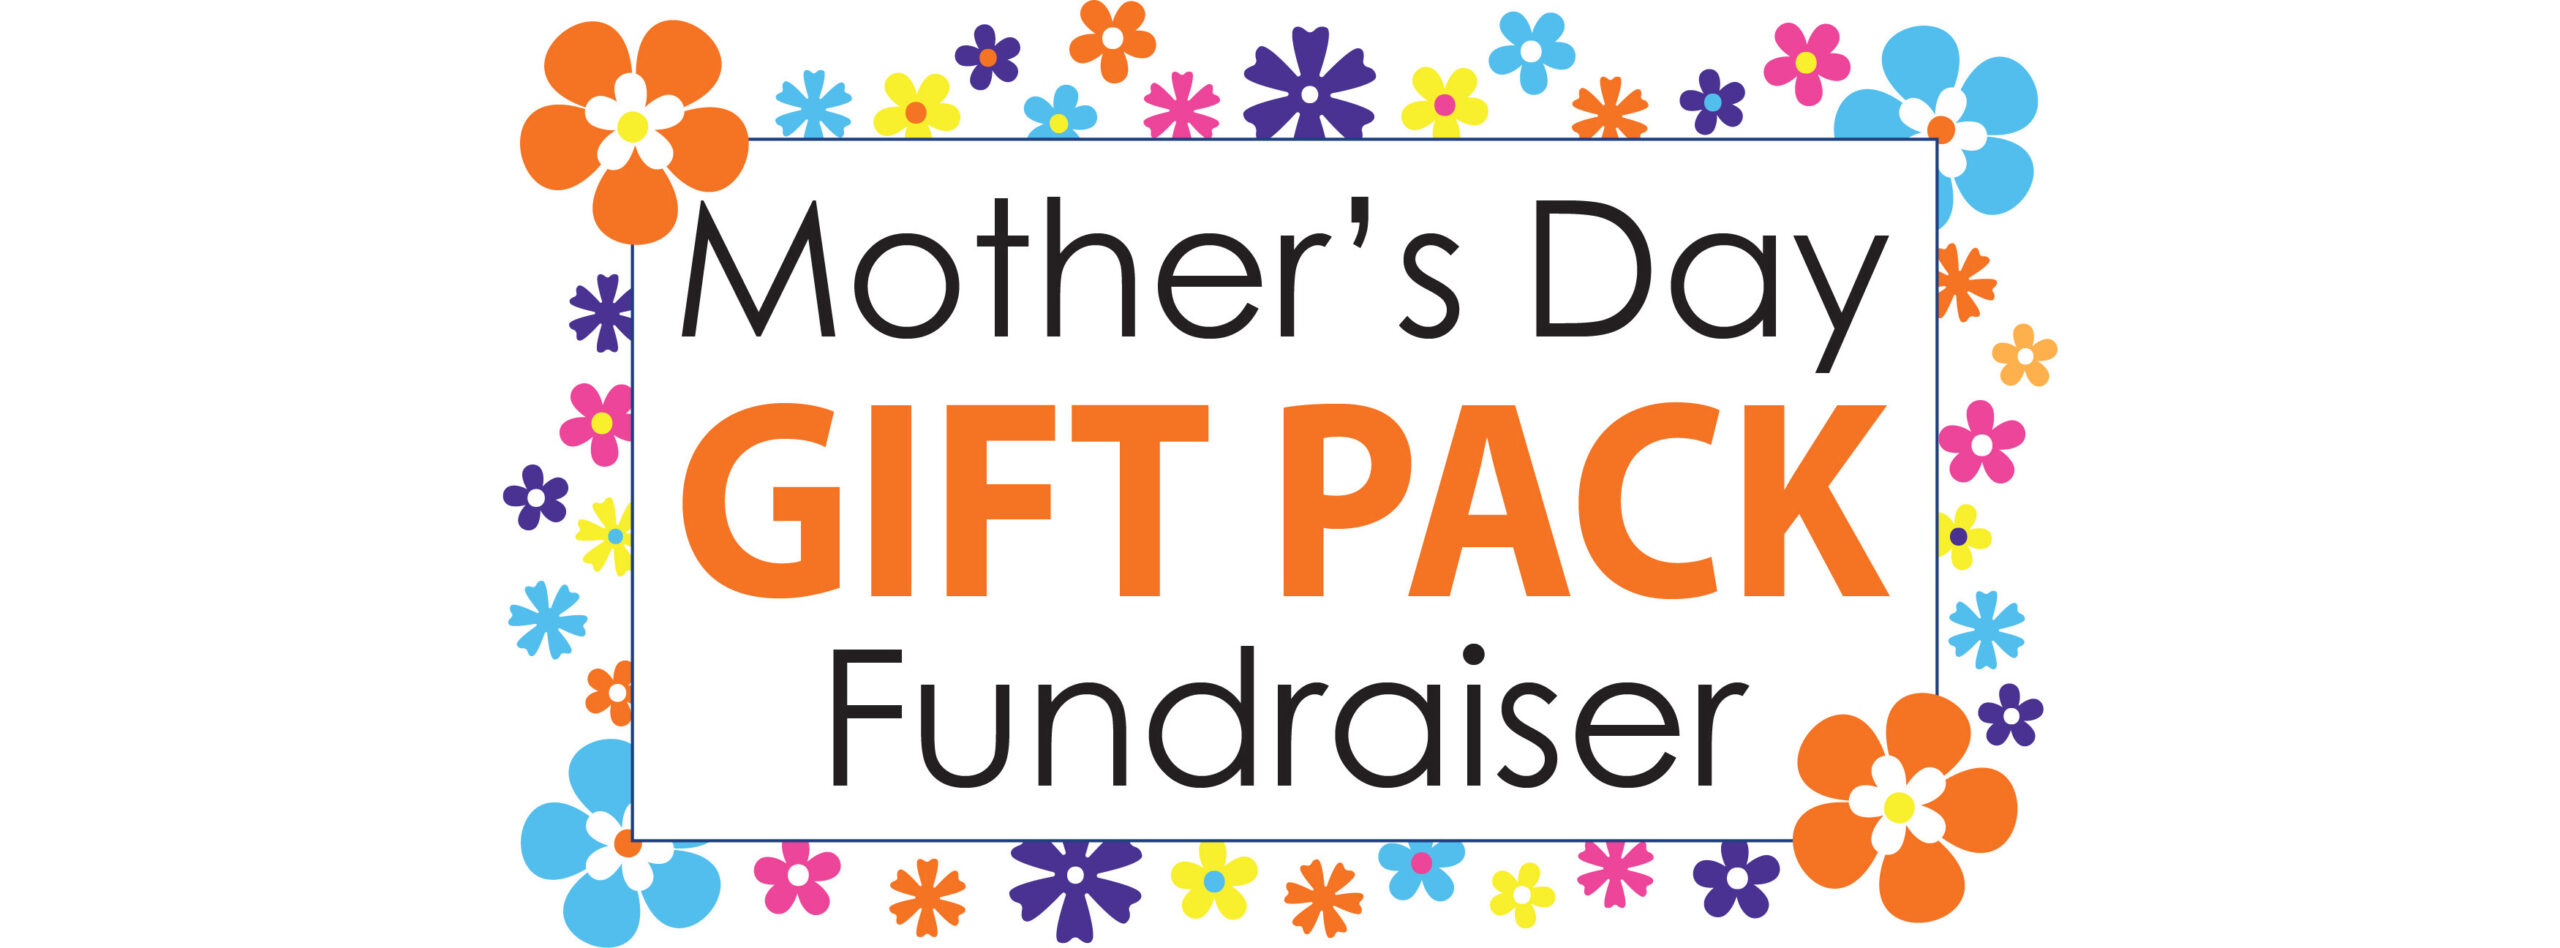 Mother’s Day Gift Pack Fundraiser